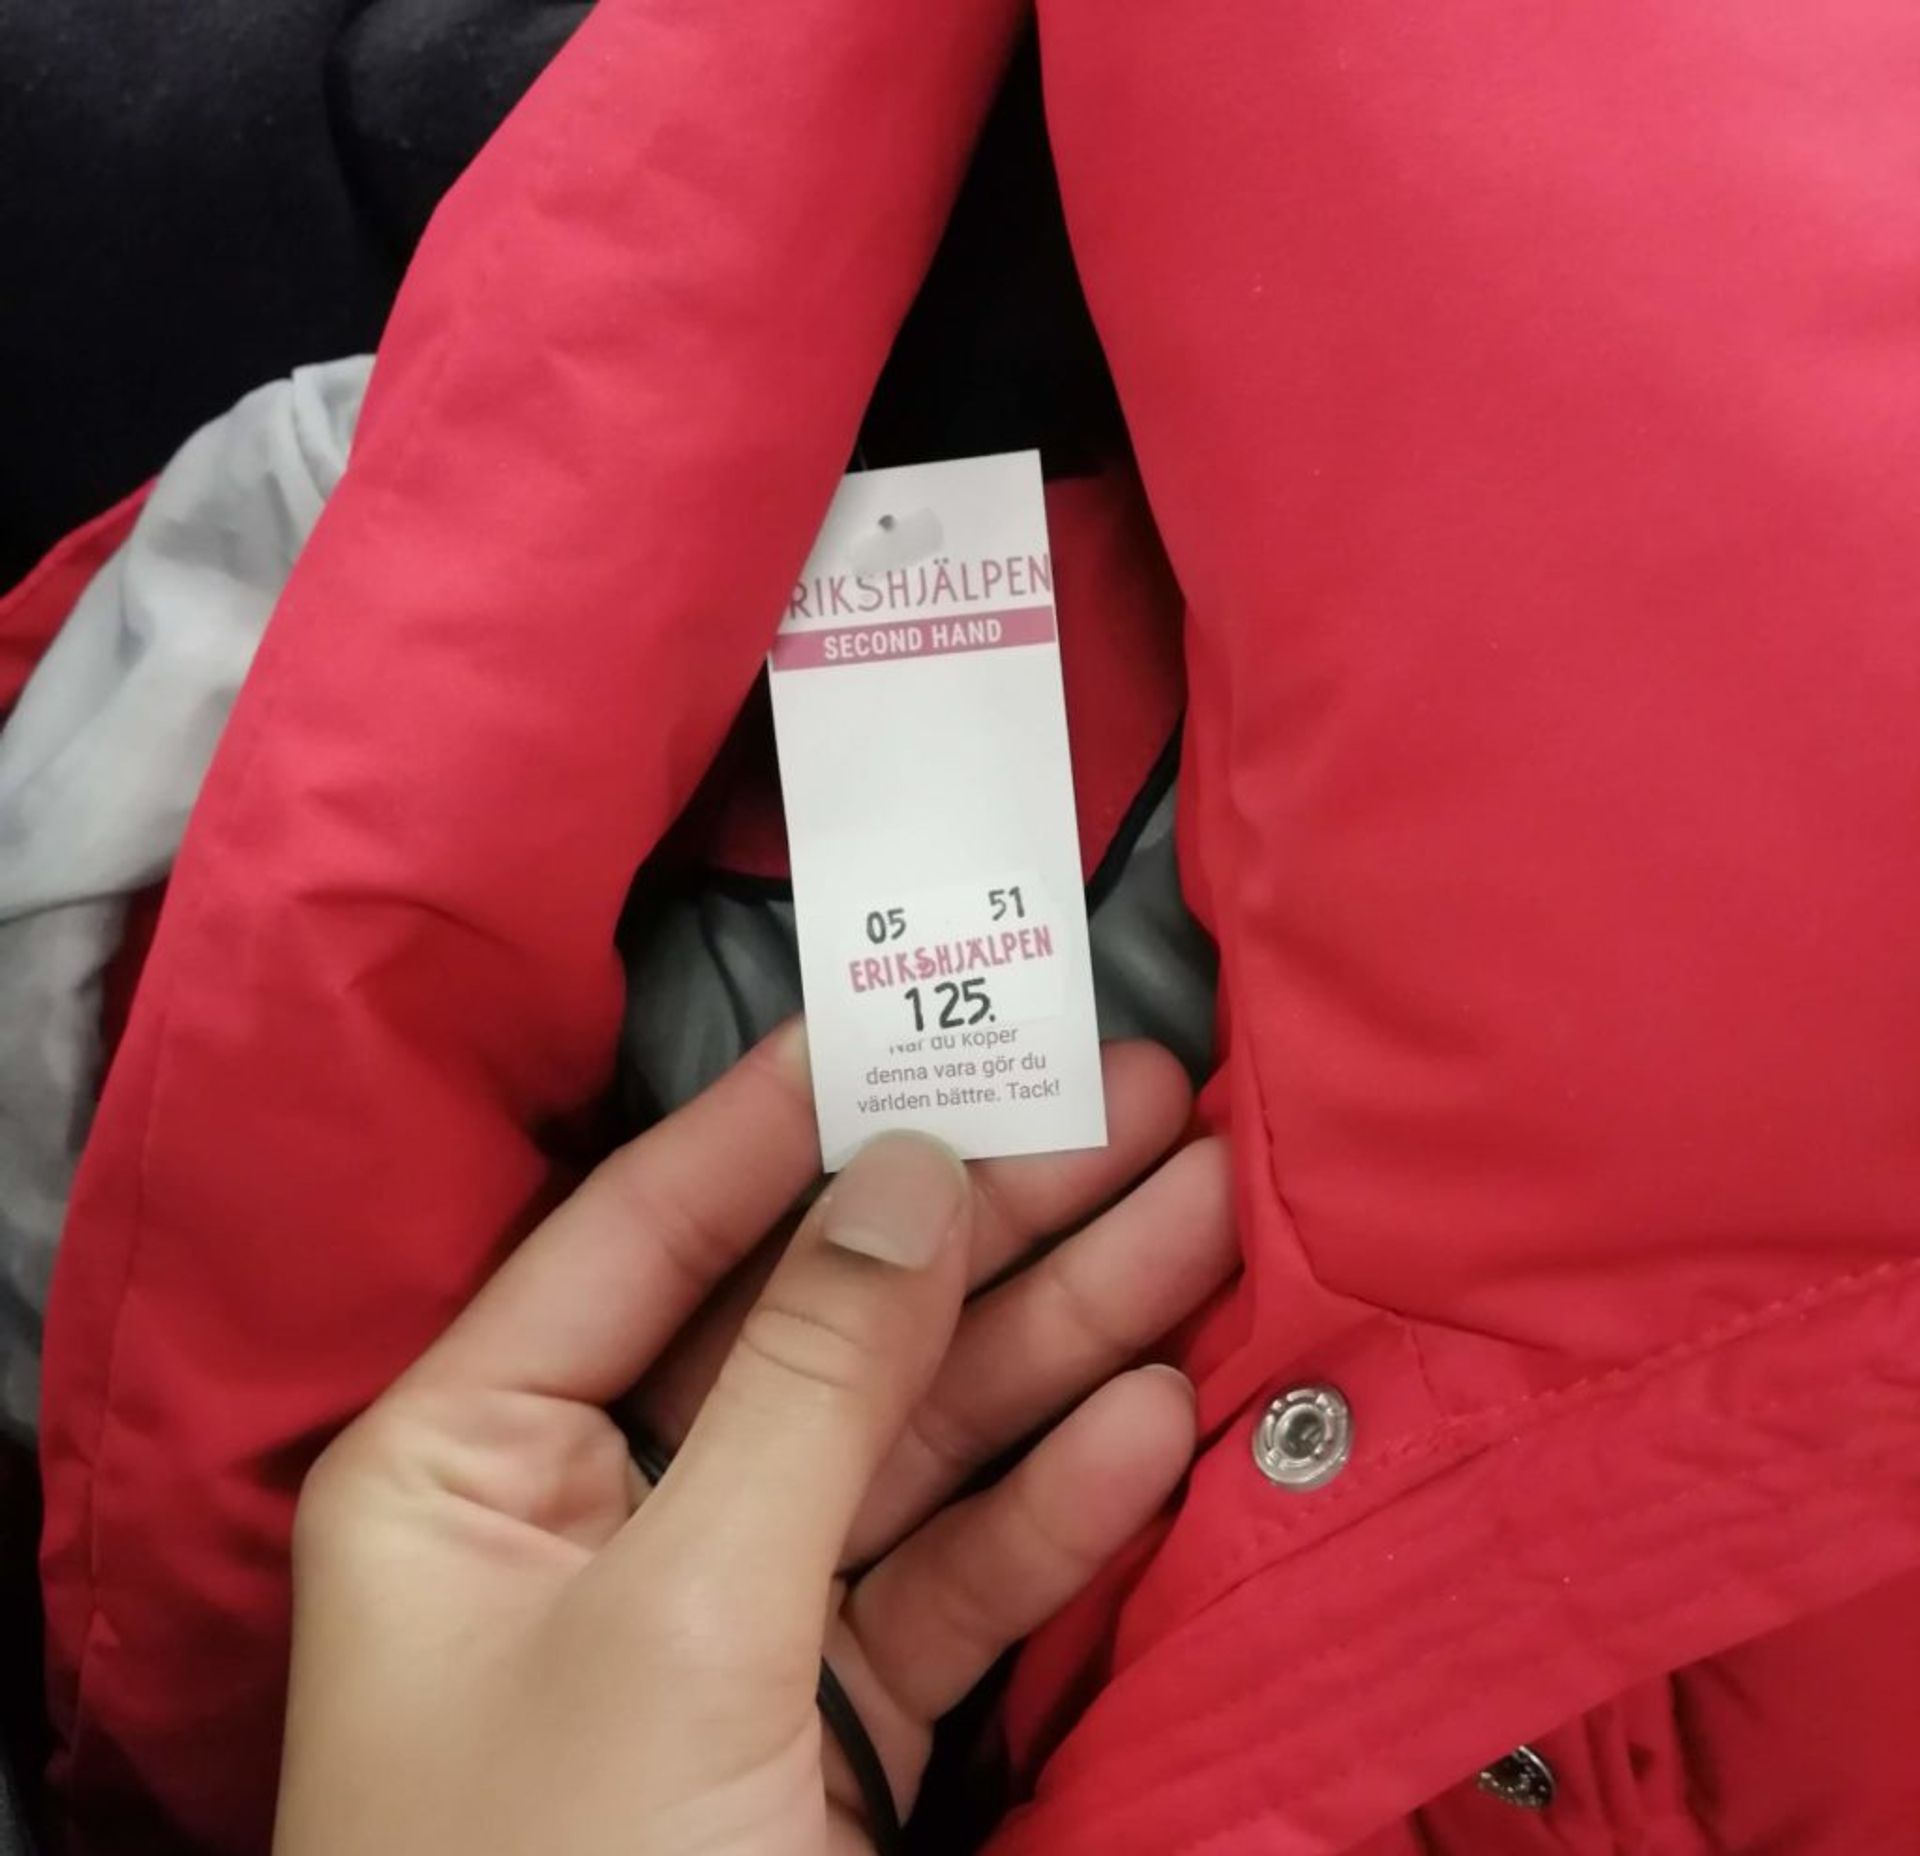 A red winter coat with a Erikshjälpen price tag. The price tag show that it's  SEK 125.